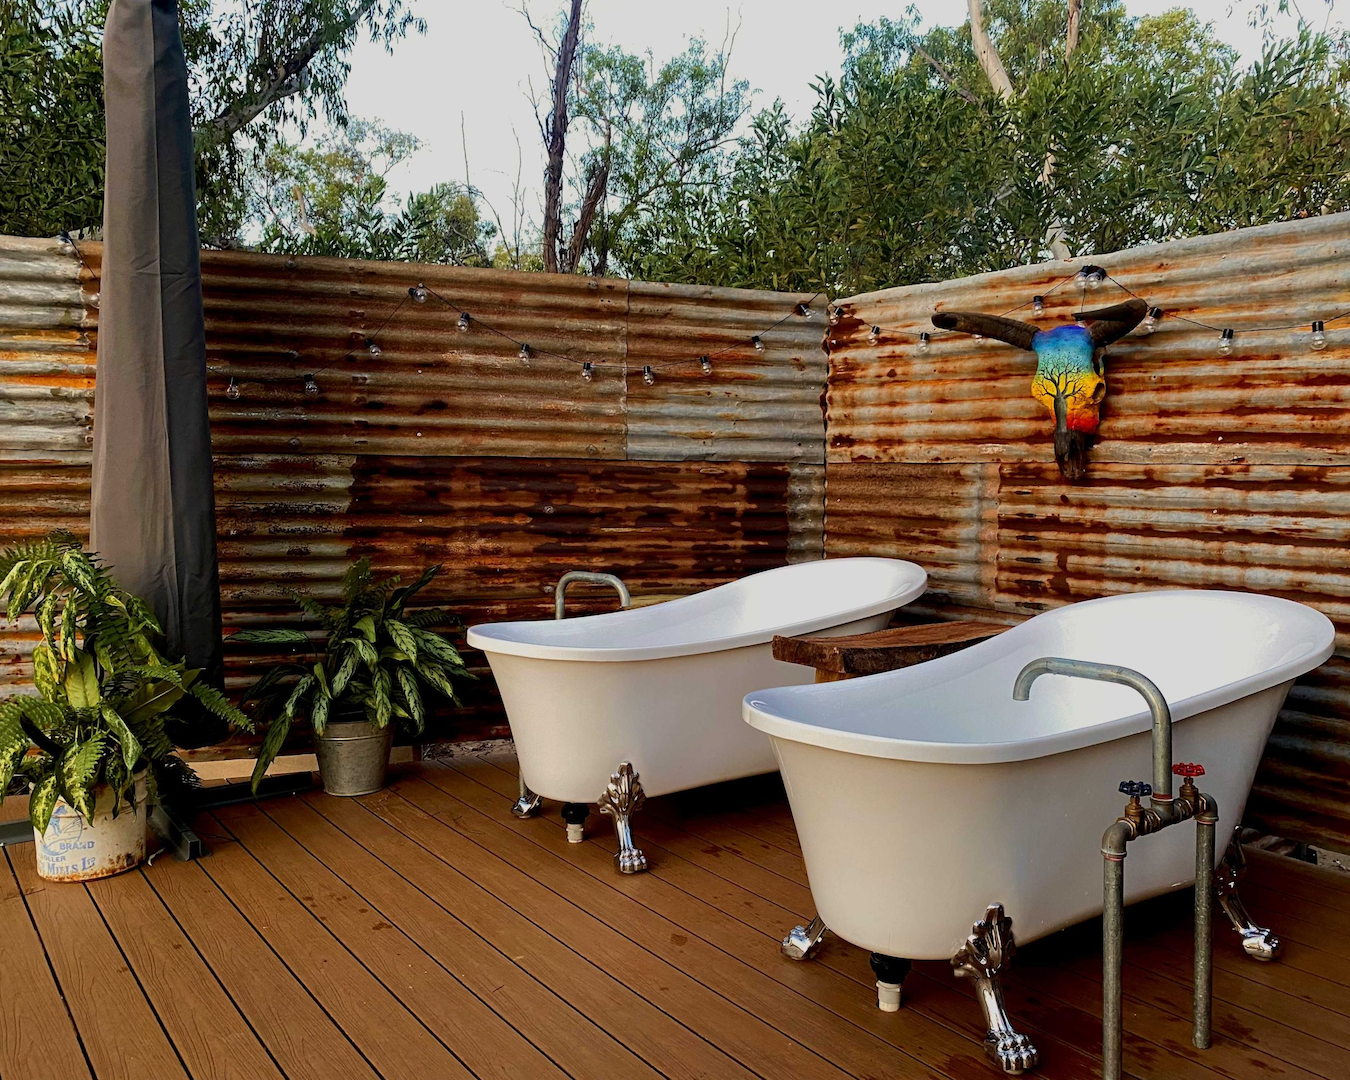 Two outdoor baths at a WA station stay